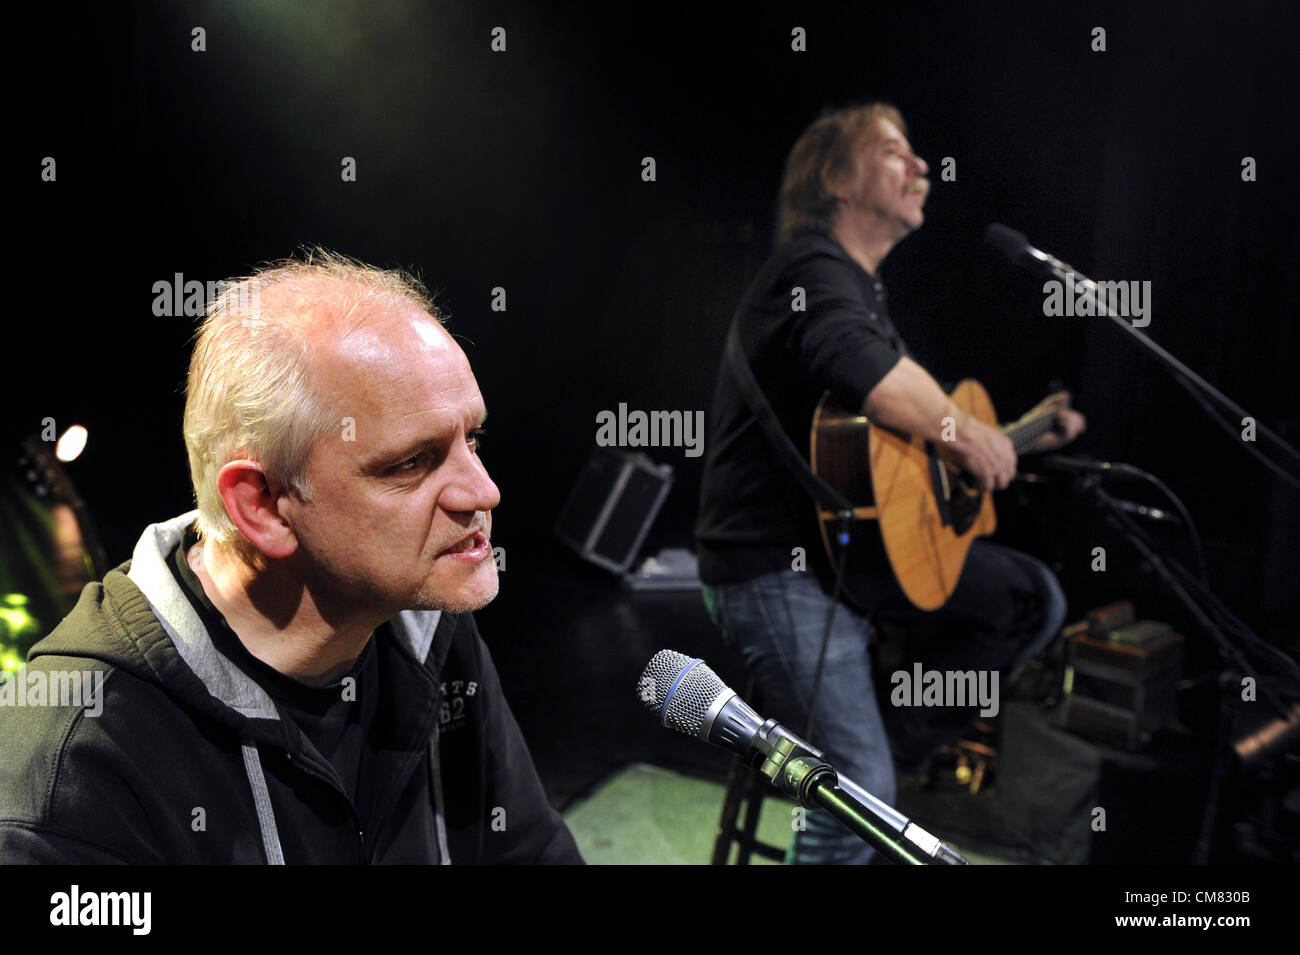 Czech singer and songwriter Jaromir Nohavica (right) and German Stock Photo  - Alamy